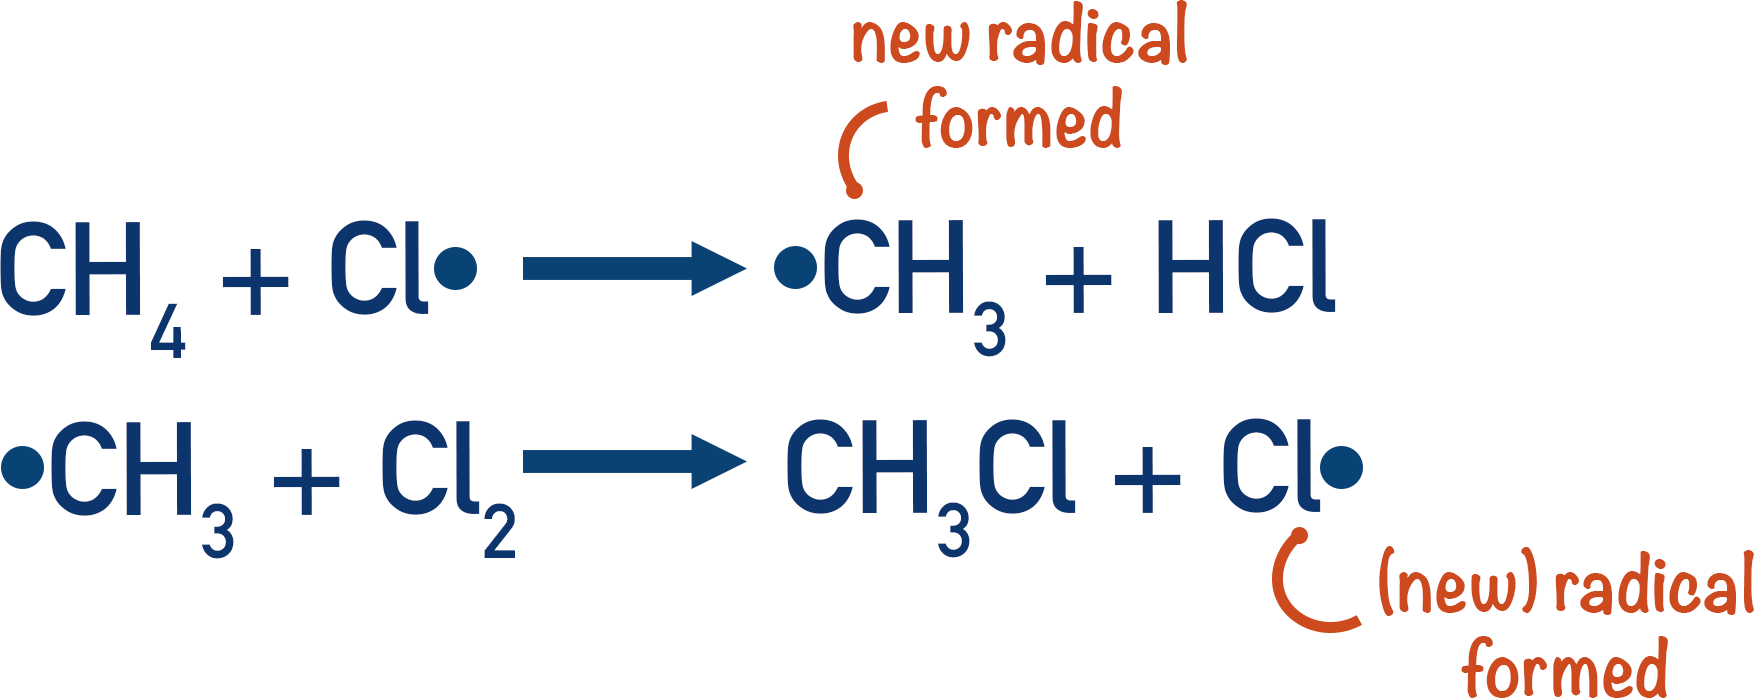 propagation step free radical substitution methane and chlorine